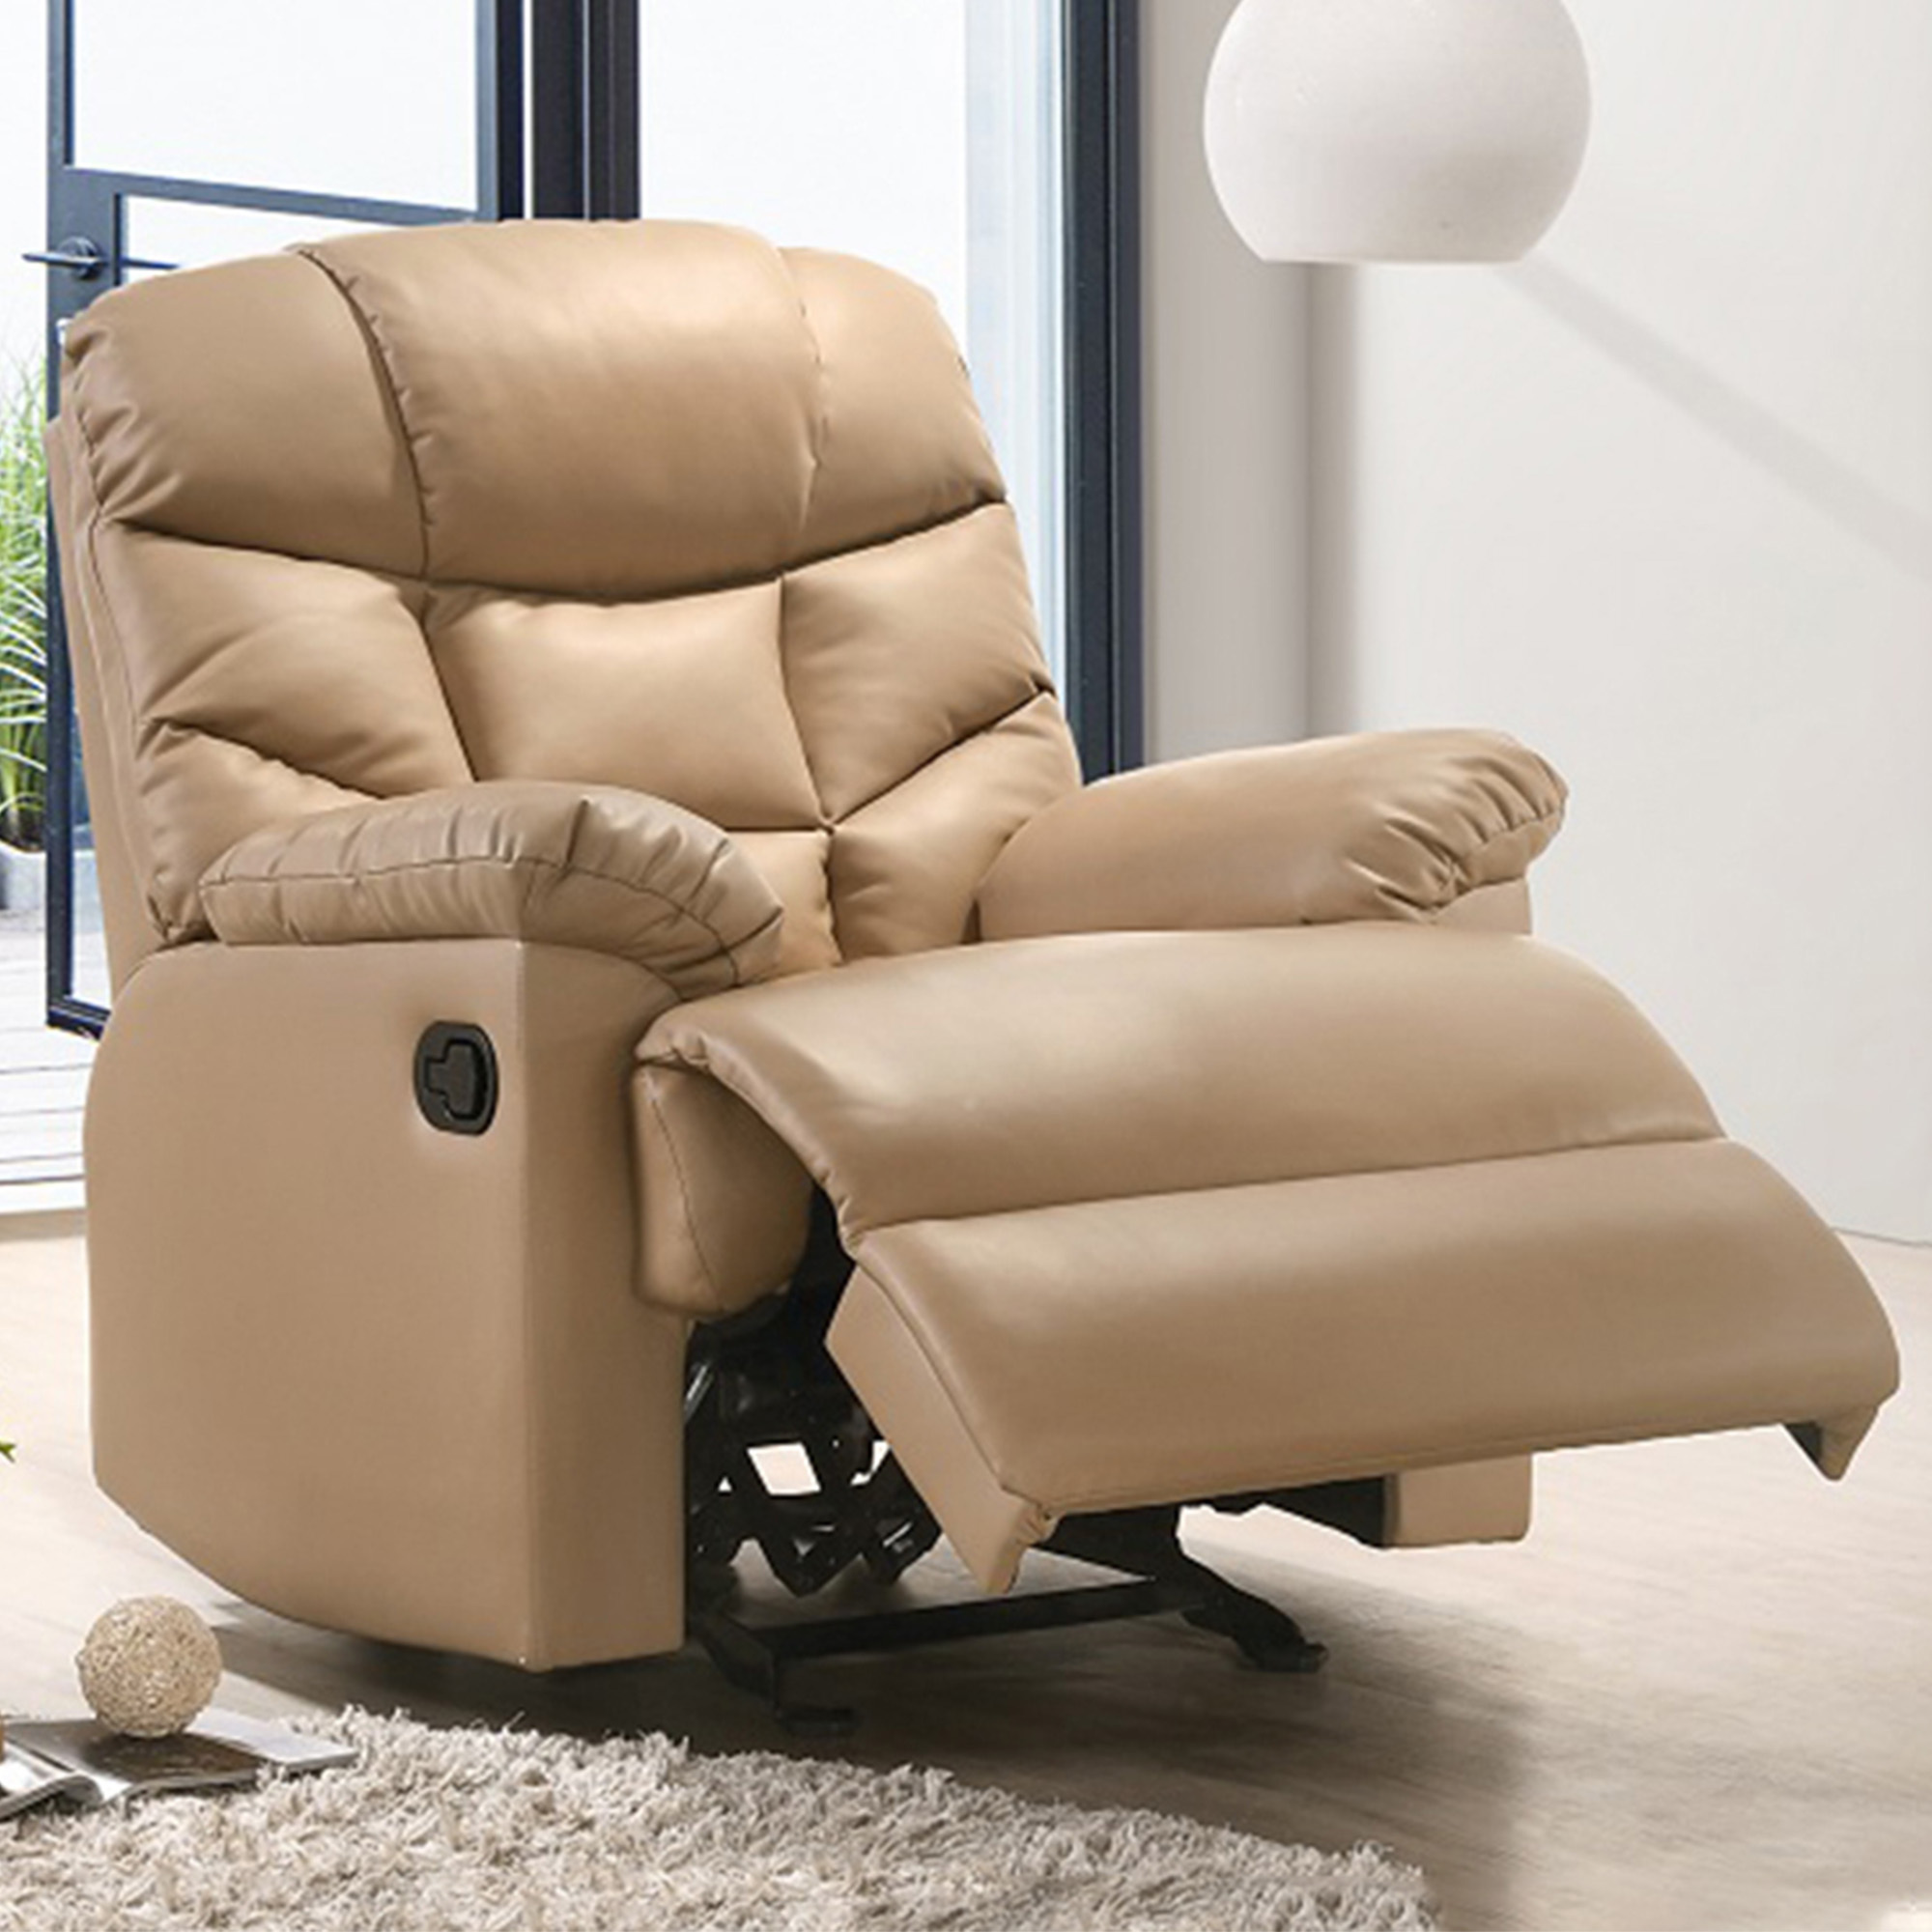 Nordichouse Beige Fabby Faux Leather, Light Tan Leather Recliner Chair